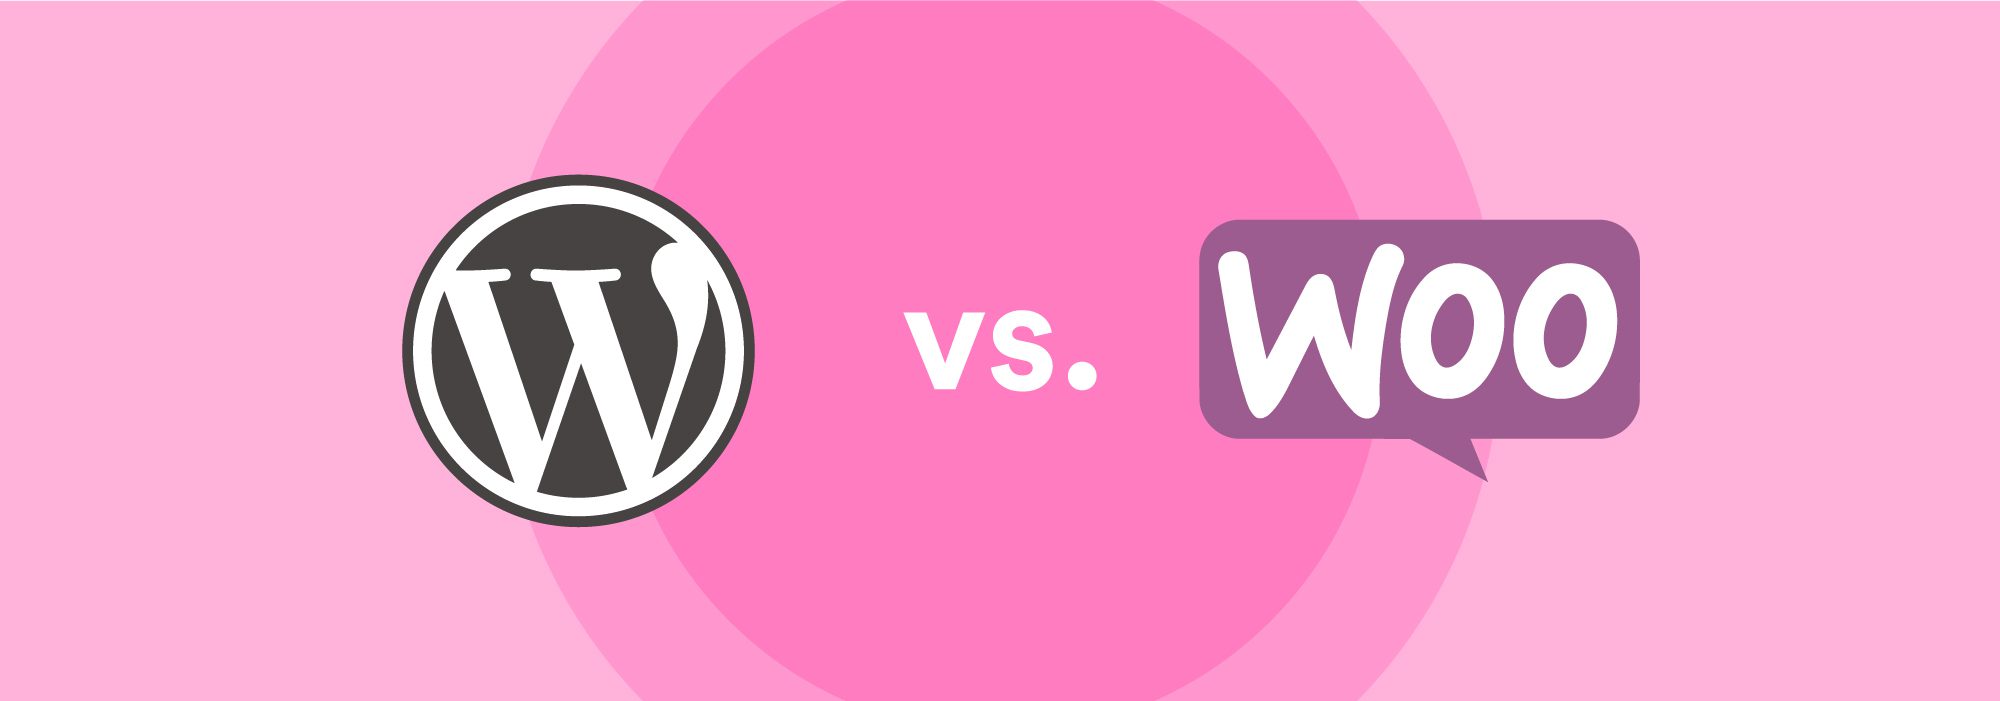 What Is the Difference Between WordPress Hosting and WooCommerce Hosting?